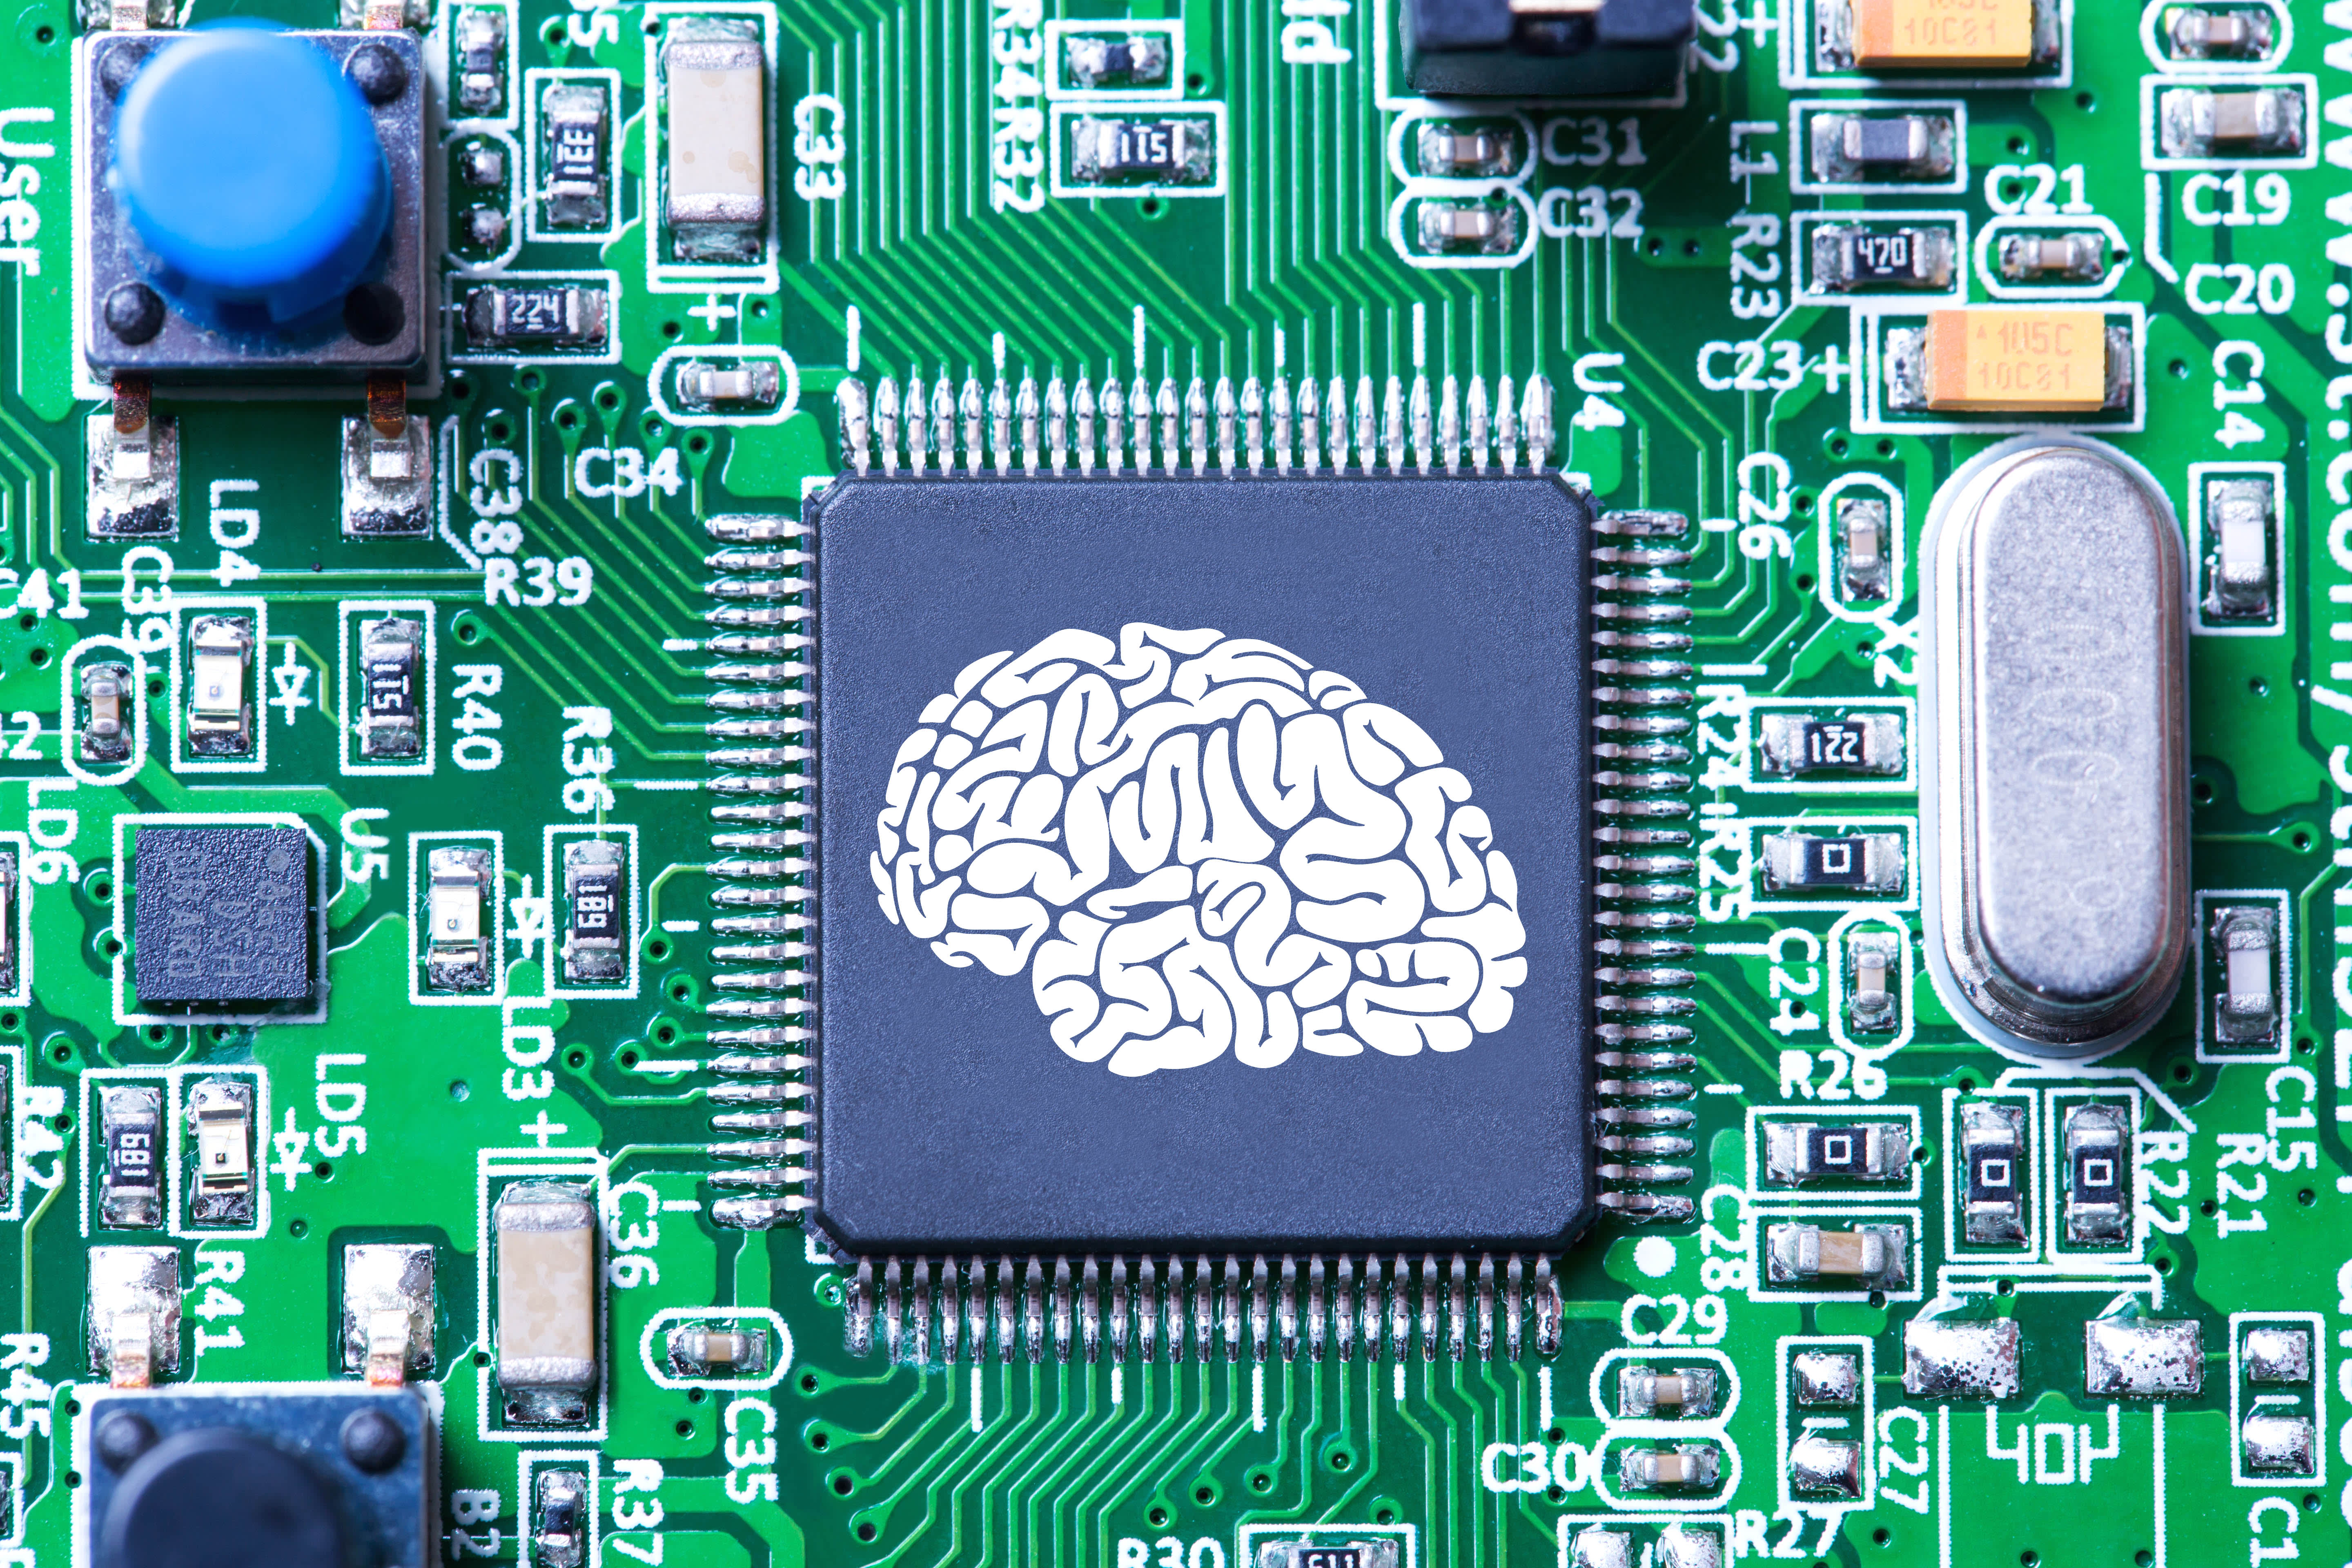 106849703-1614928843038-gettyimages-675469672-circuit-board-brain.jpeg?v=1619124607